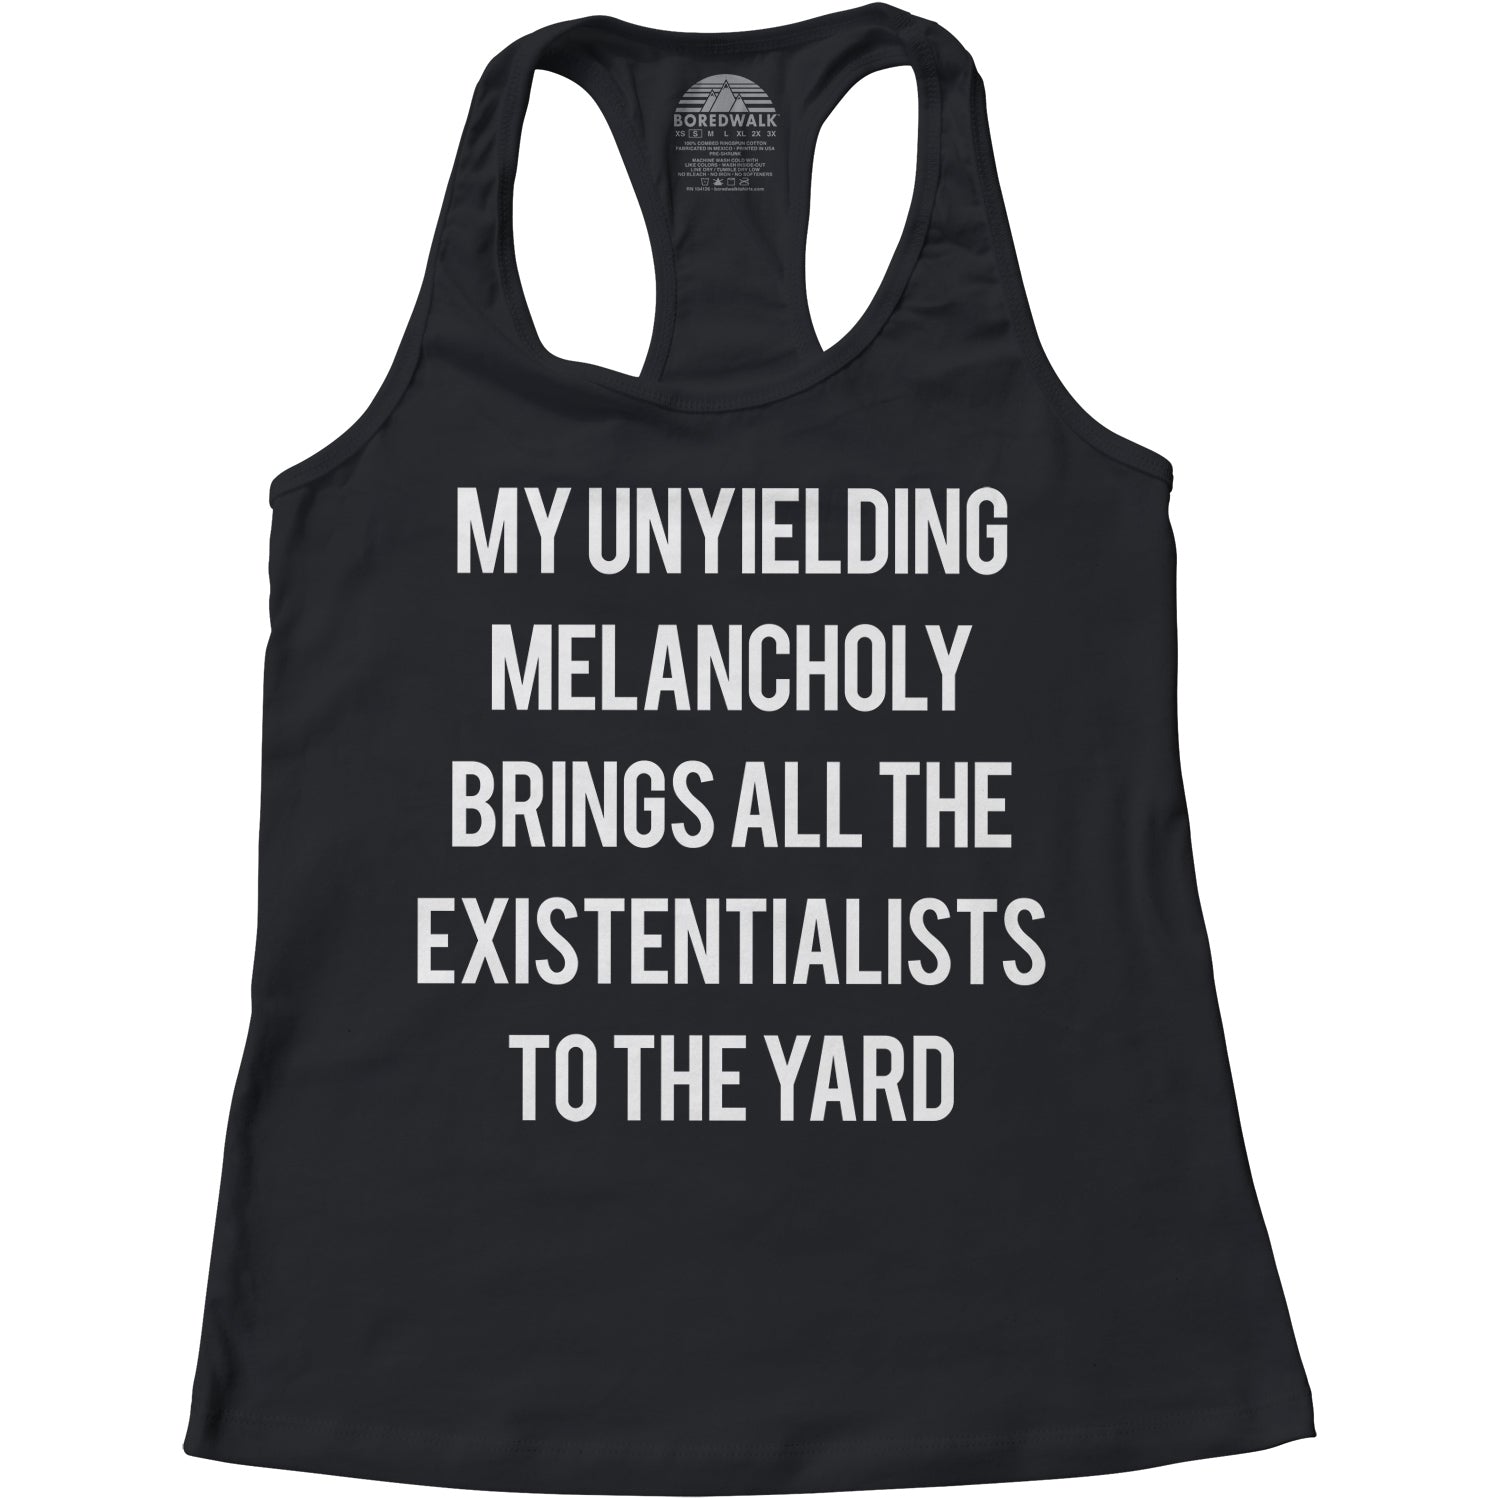 Women's My Unyielding Melancholy Brings All The Existentialists To The Yard Racerback Tank Top